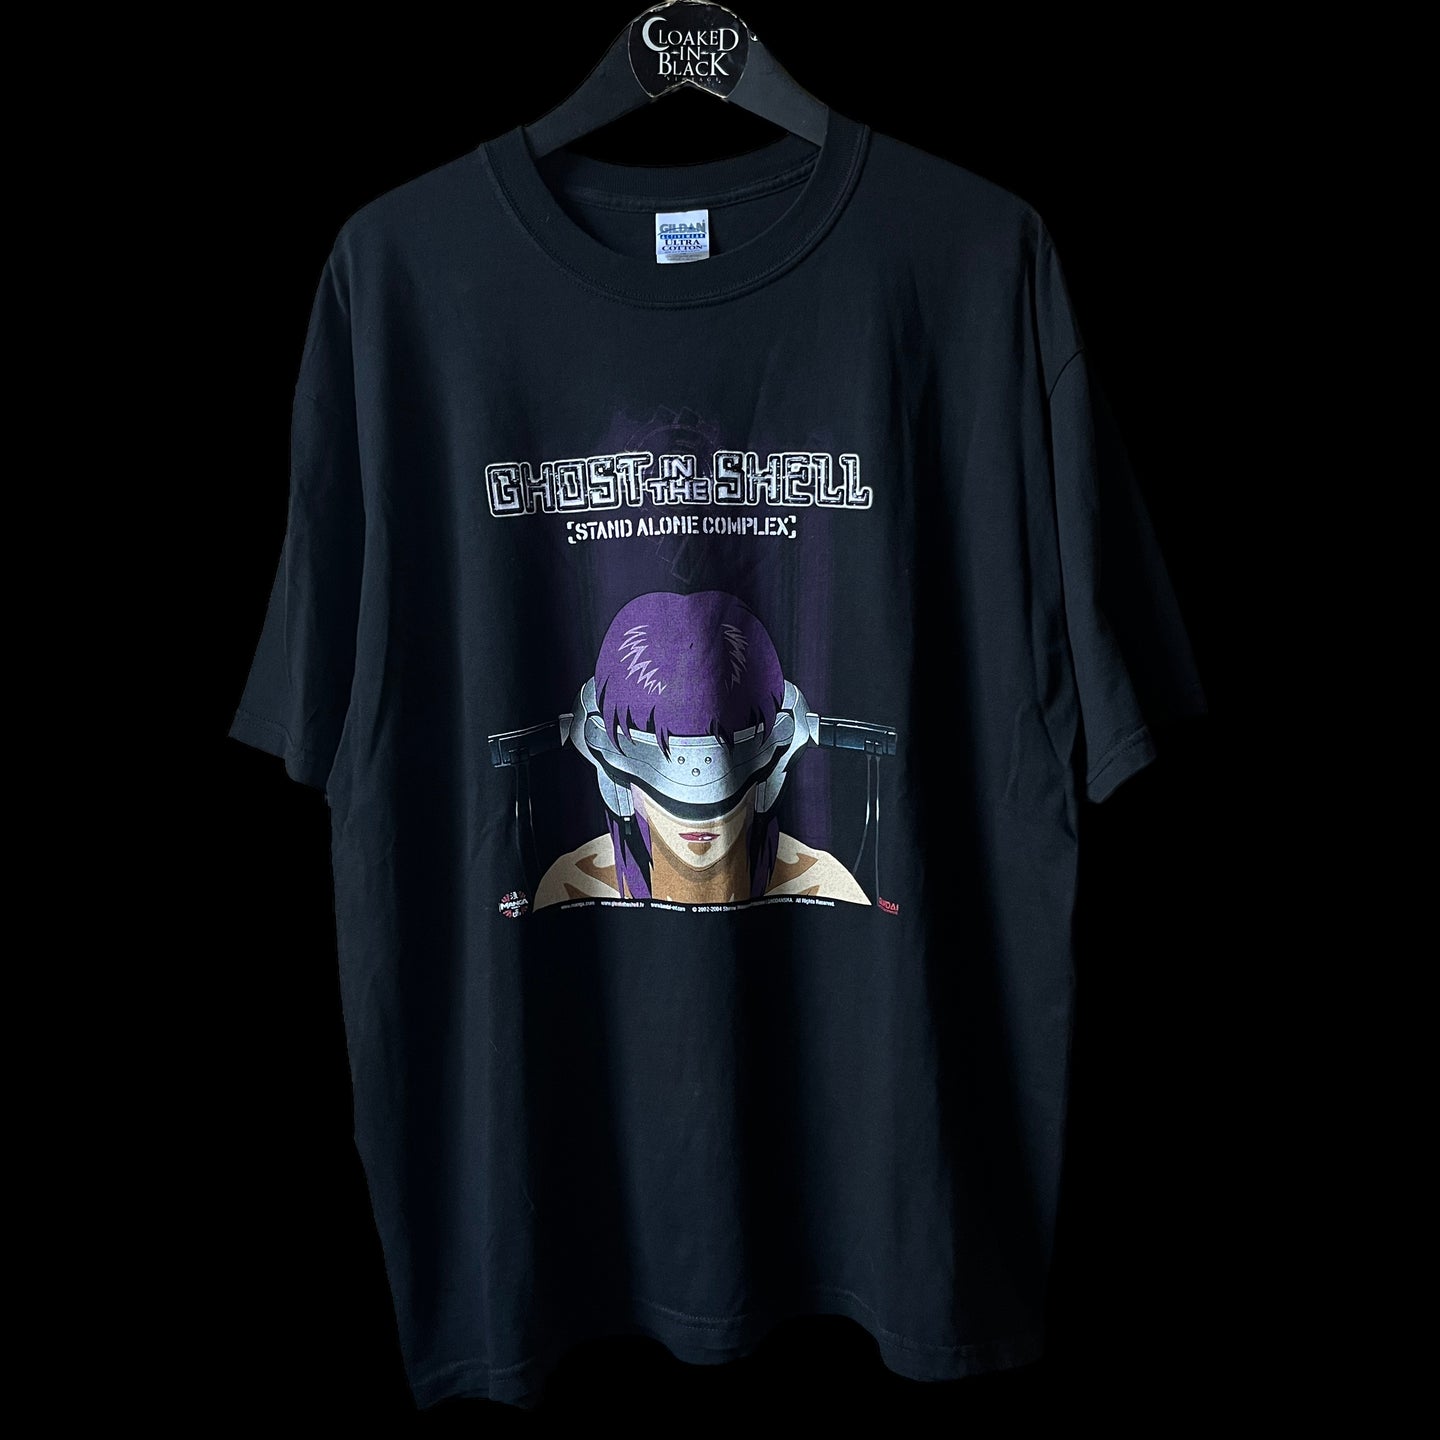 GHOST IN THE SHELL「VIP SAC PROMO」XL